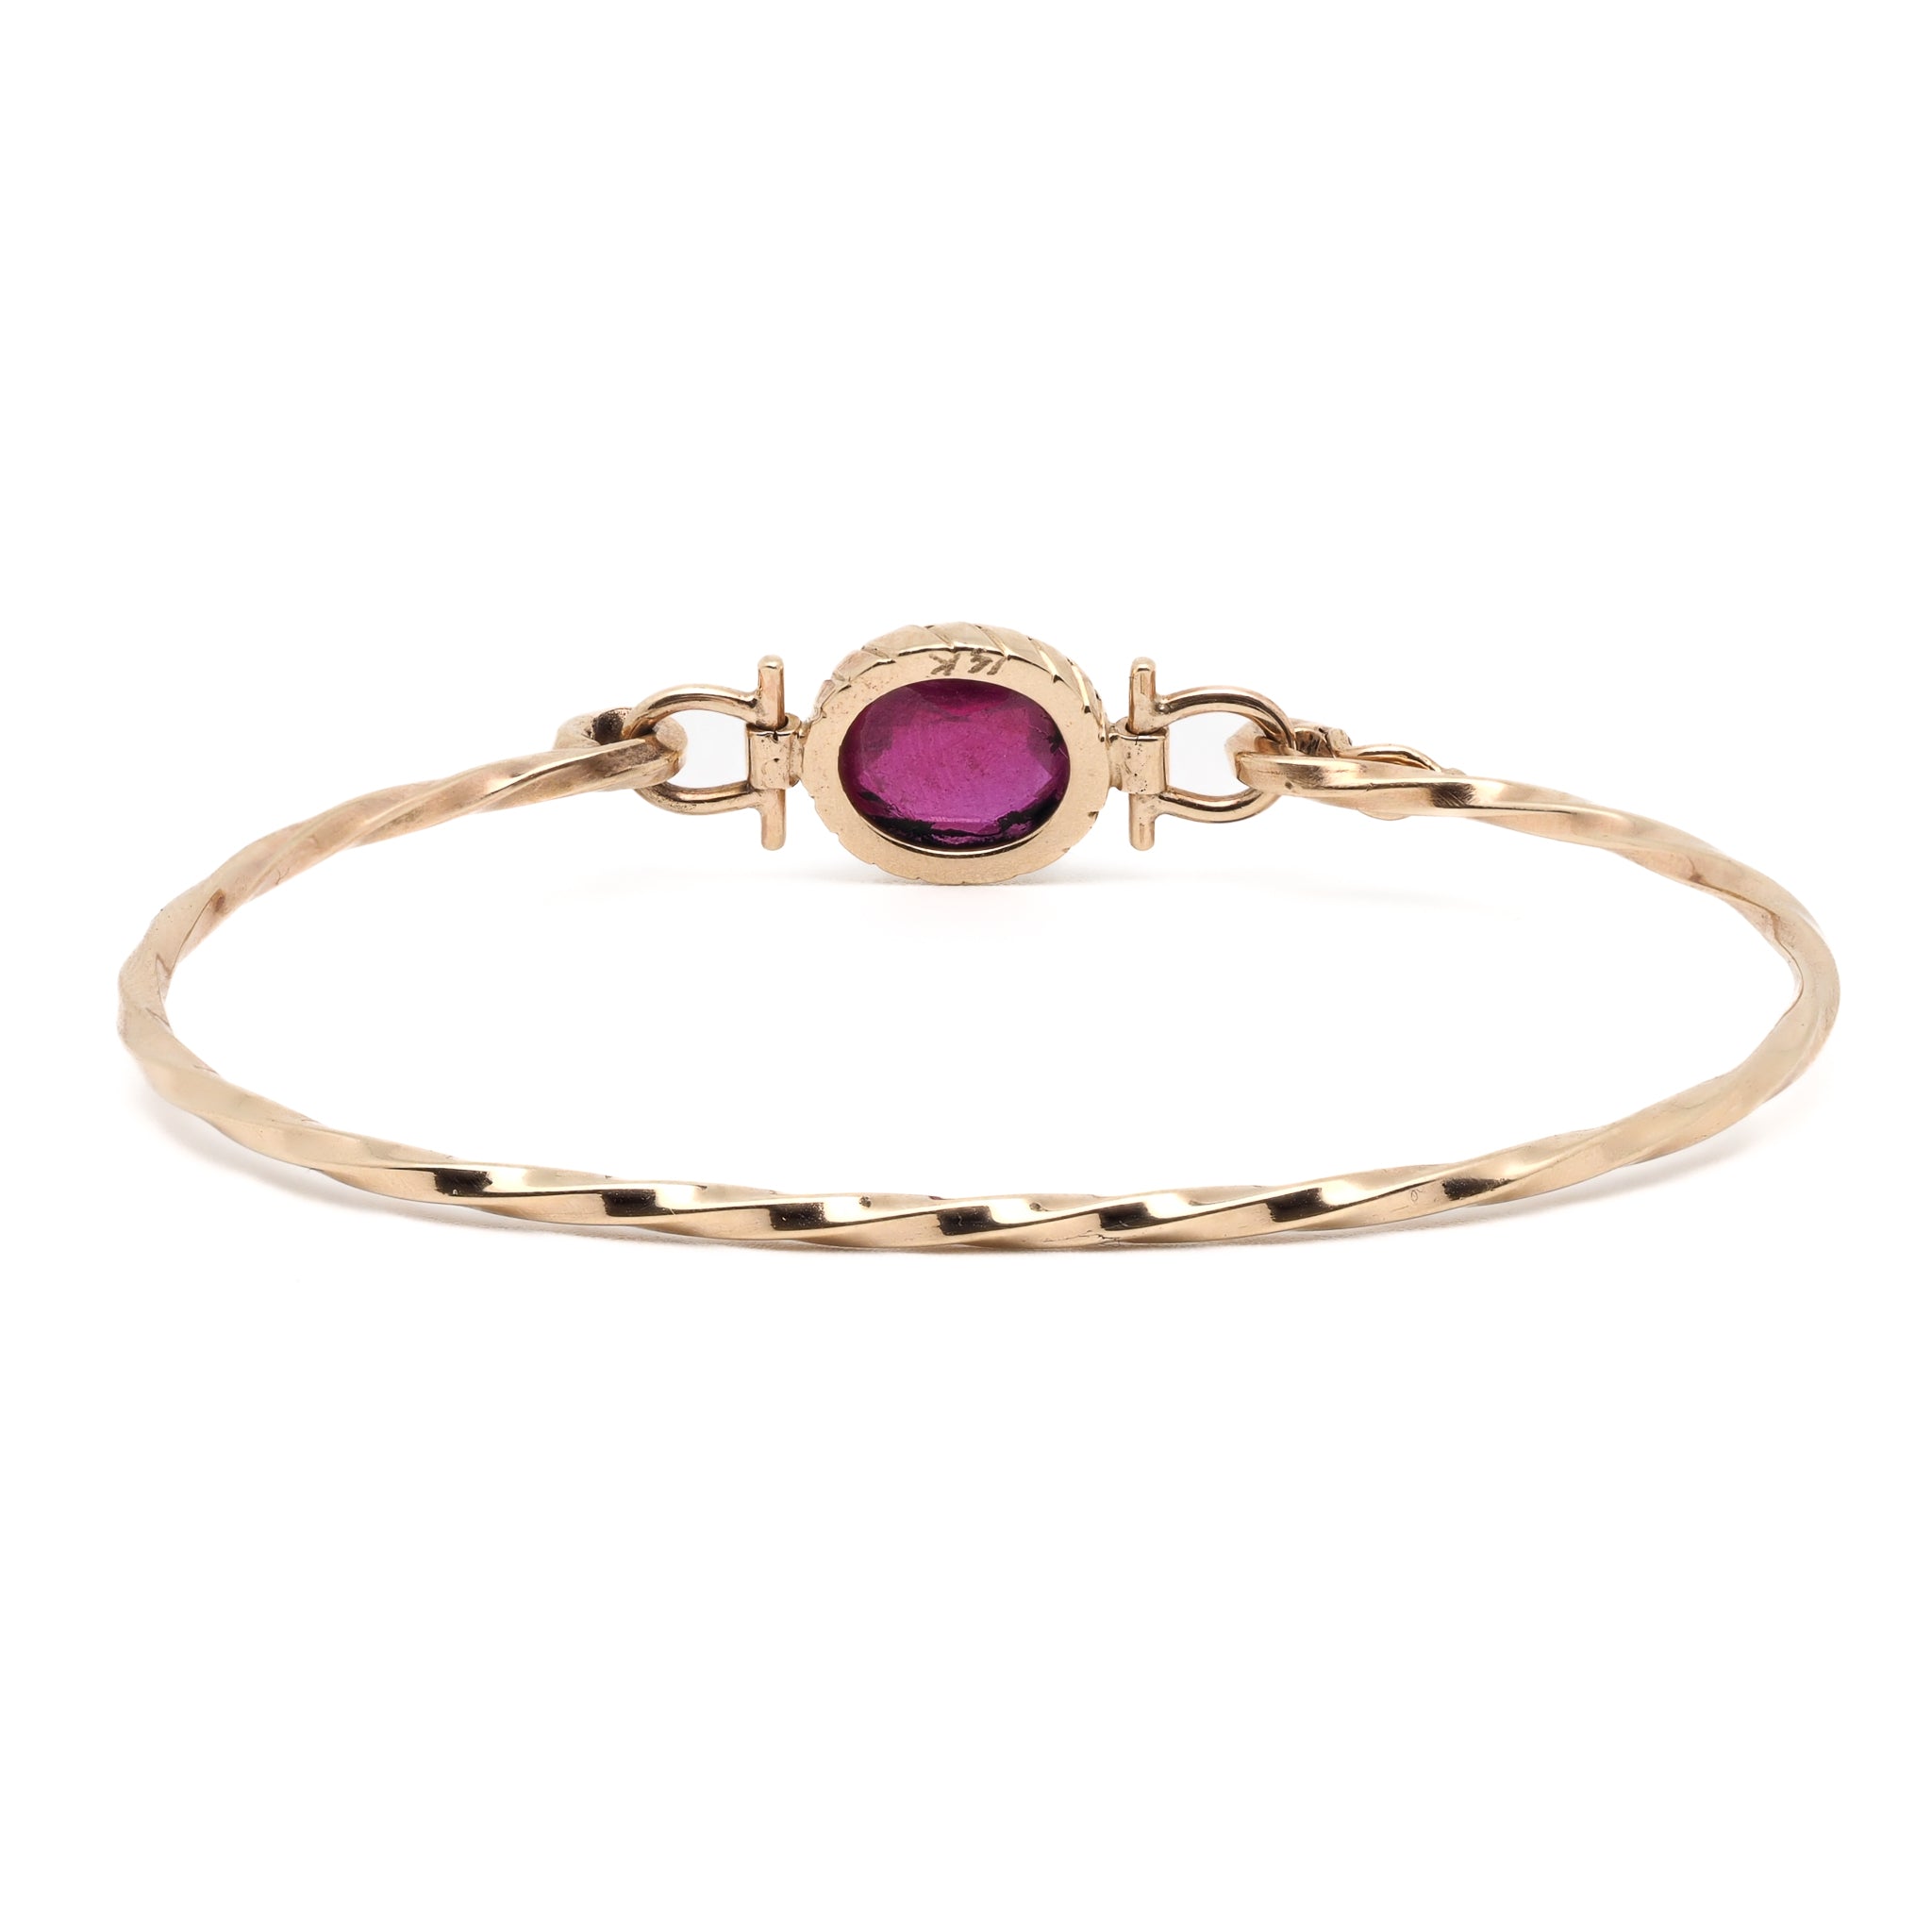 Elegant Gold Bracelet with Ruby - A captivating image displaying the elegant and timeless Gold Ruby Bangle Bracelet adorned with a beautiful natural Ruby gemstone.